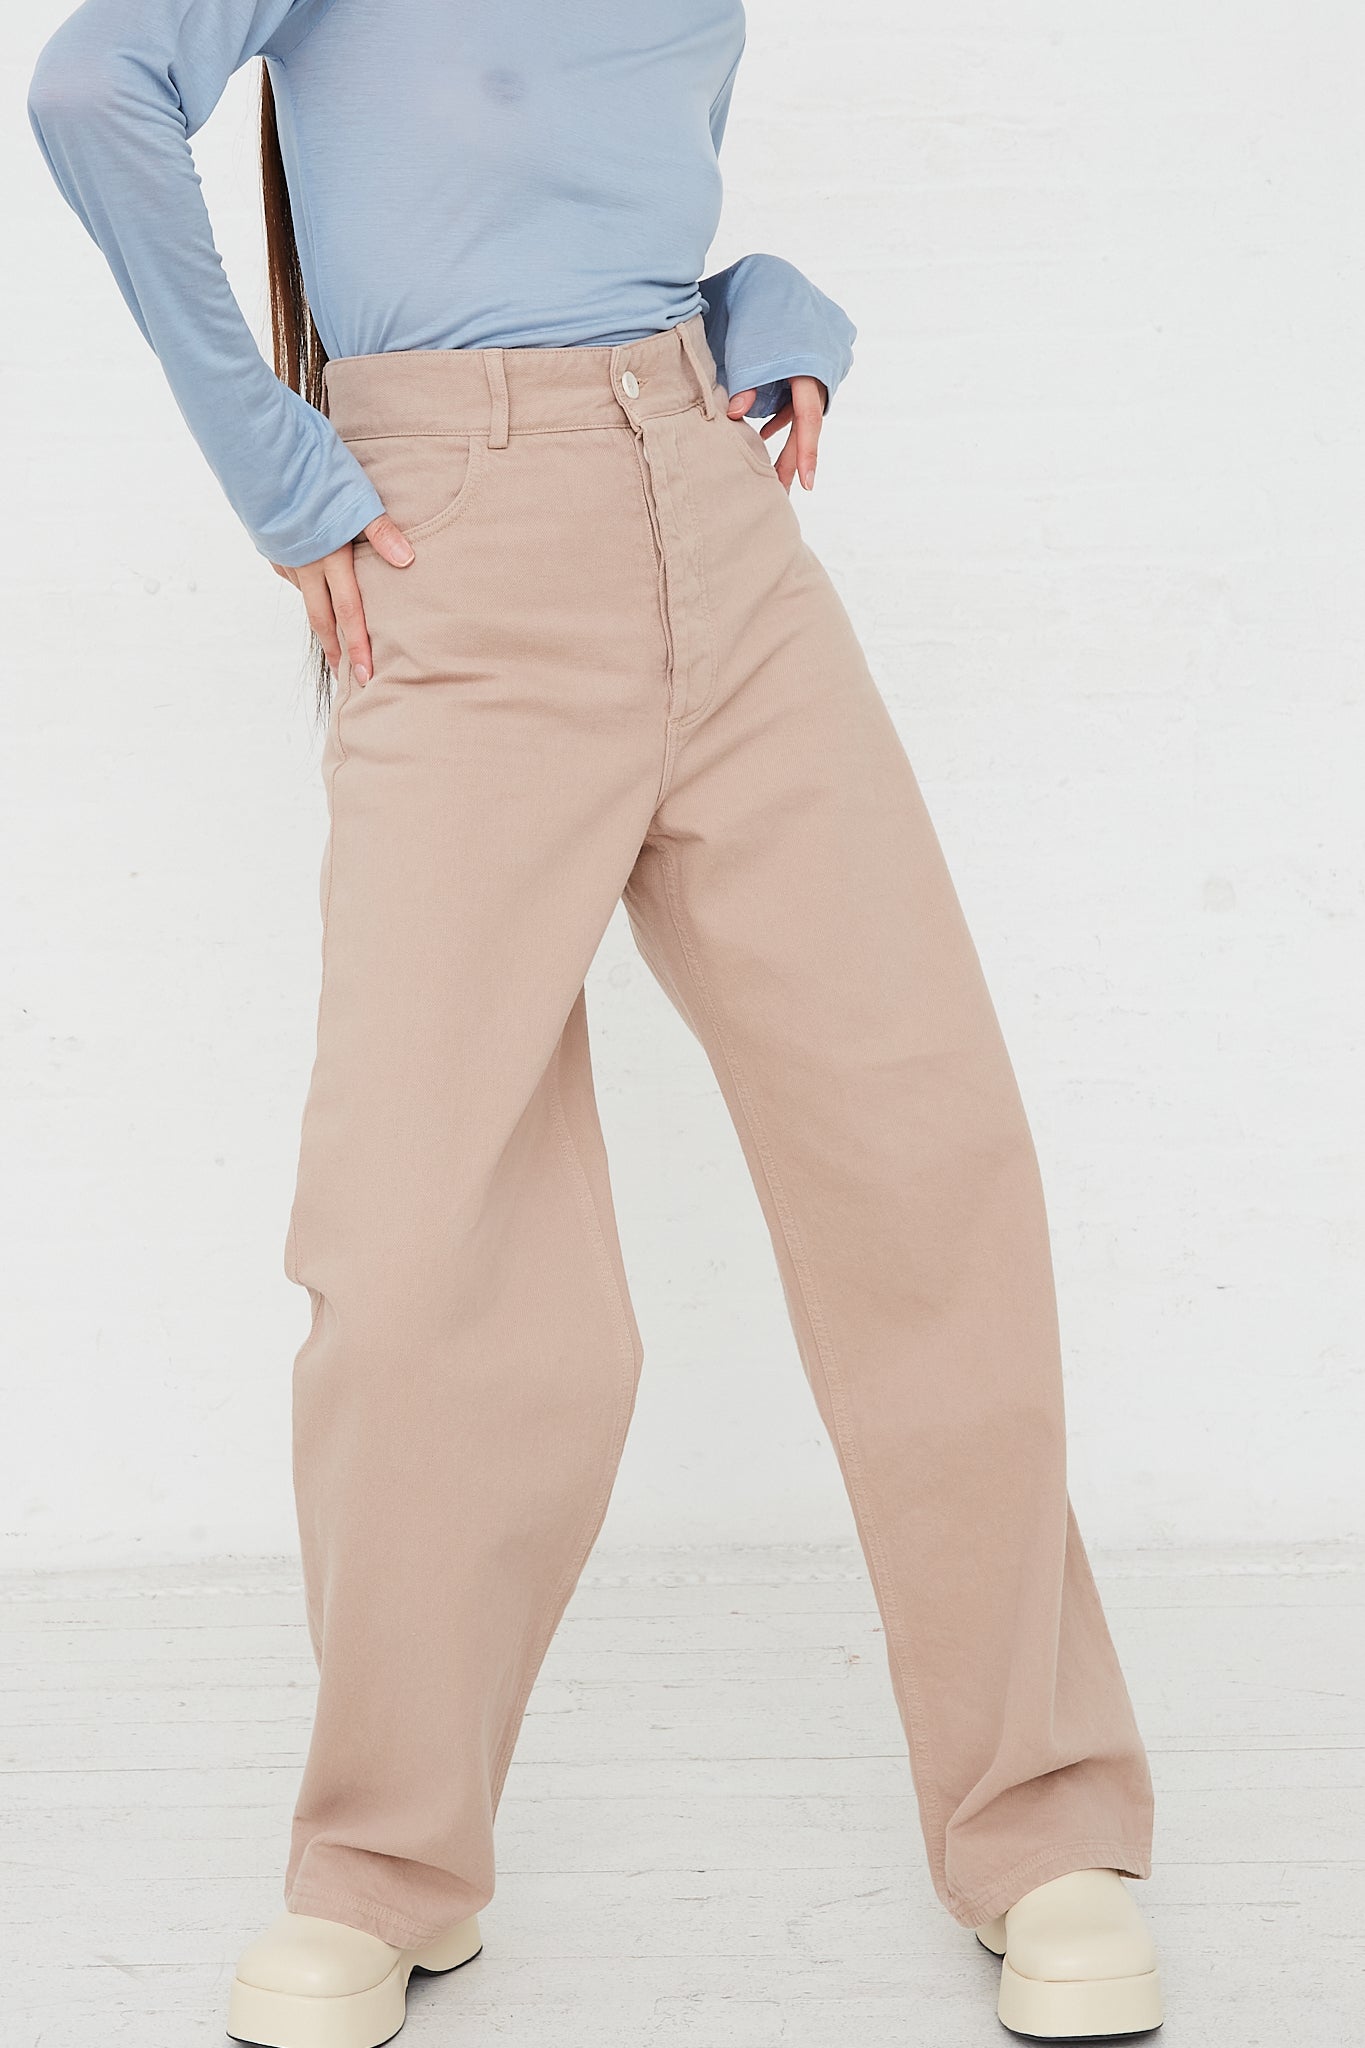 Navalo High Waist Pant in Camel by Baserange Front Upclose